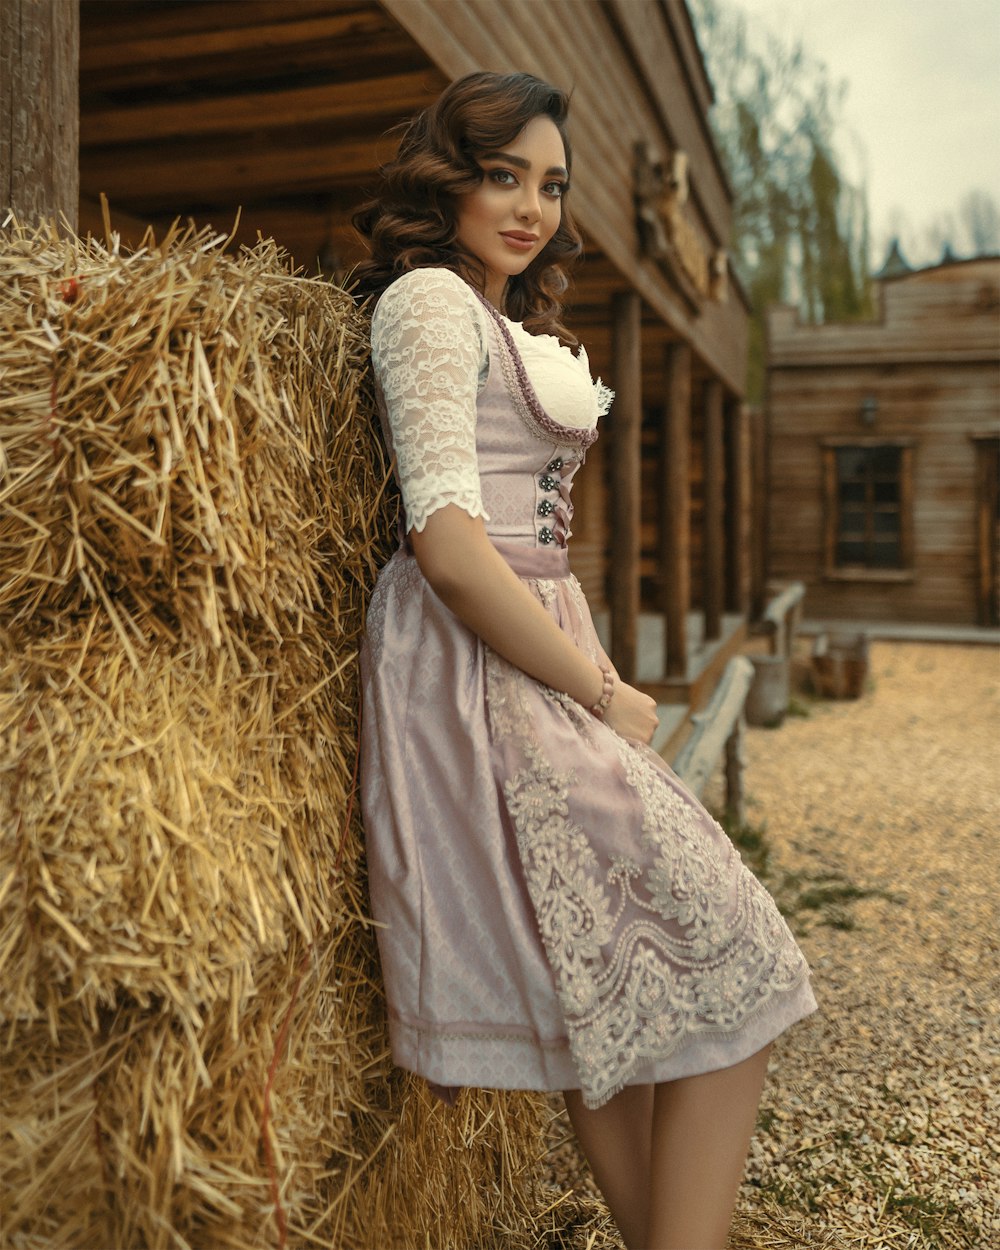 girl in white dress sitting on brown hay